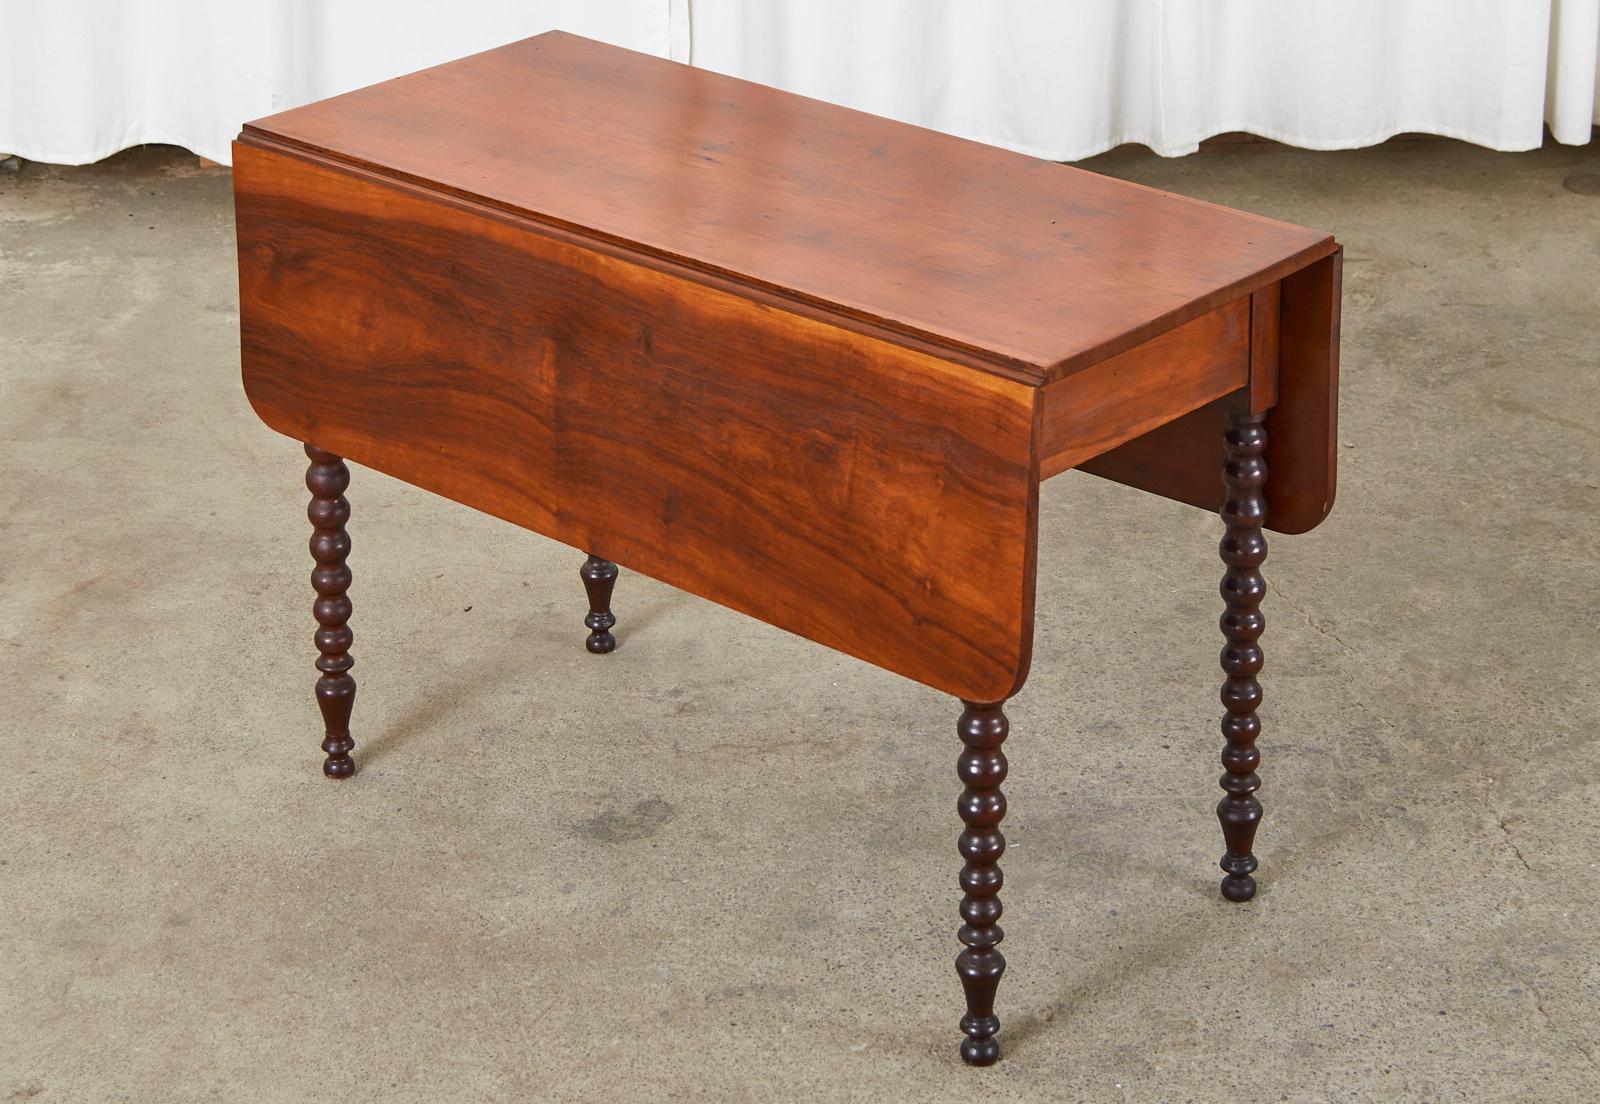 Hand-Crafted William IV Mahogany Drop Leaf Dining Table or Pembroke Table